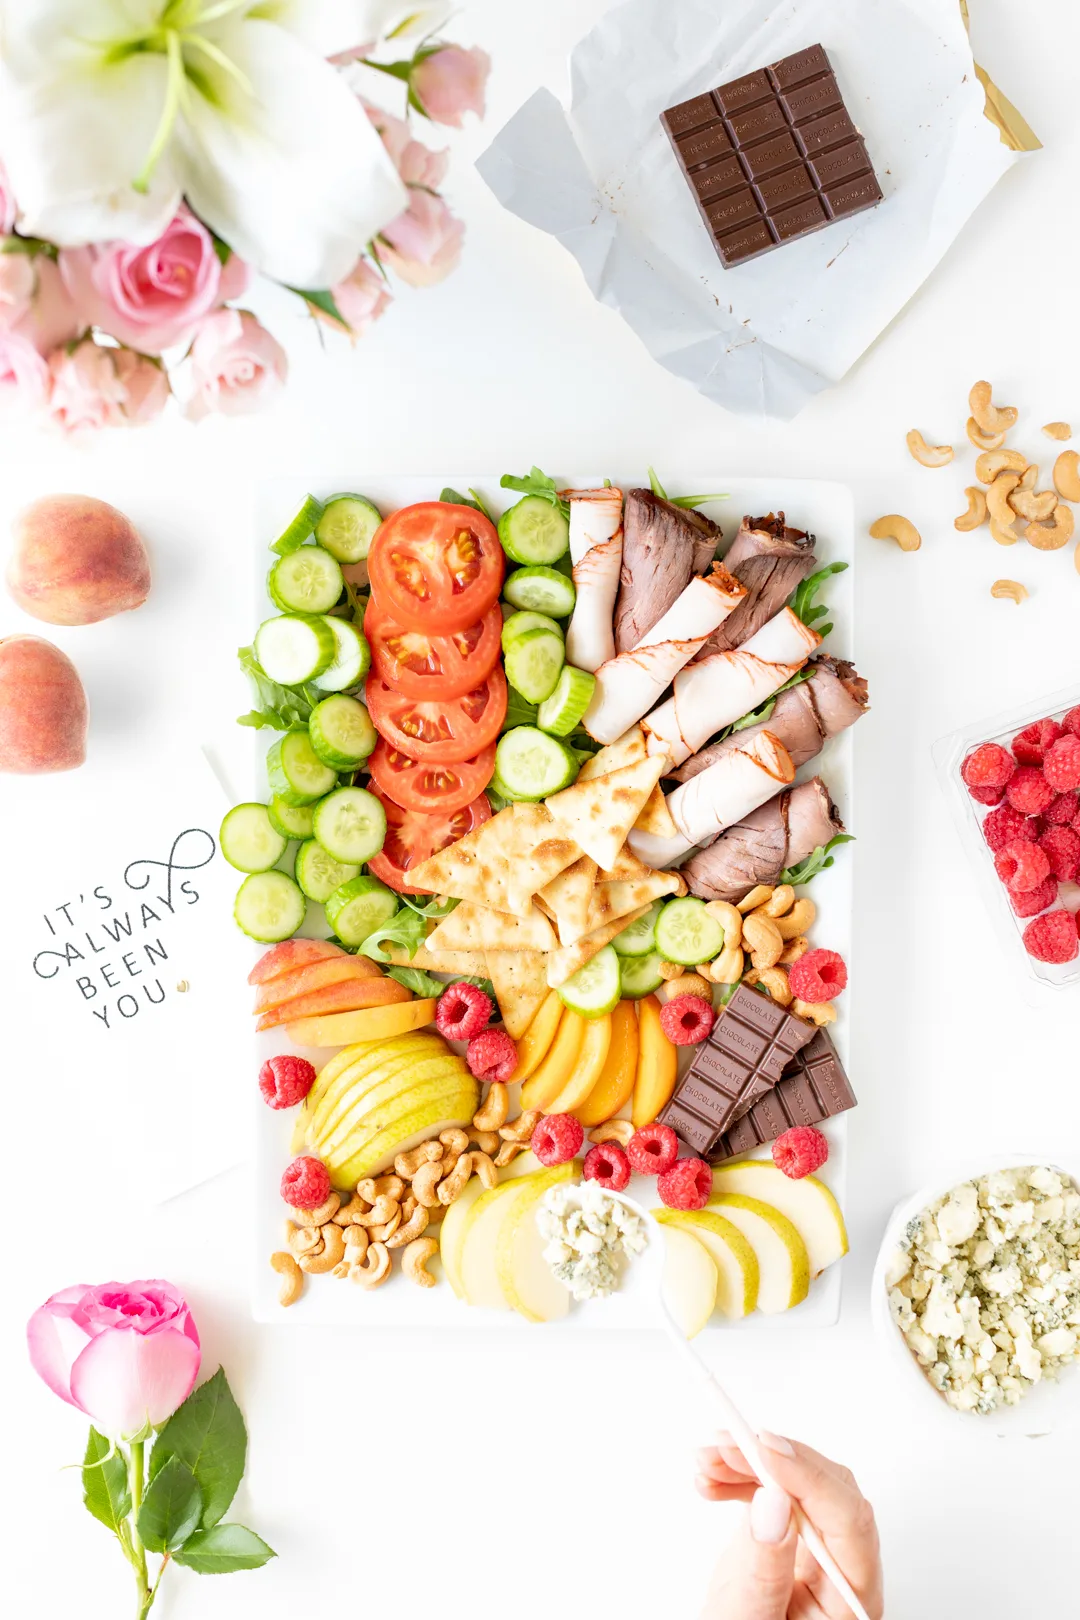 date night snack tray with meats, veggies and dessert